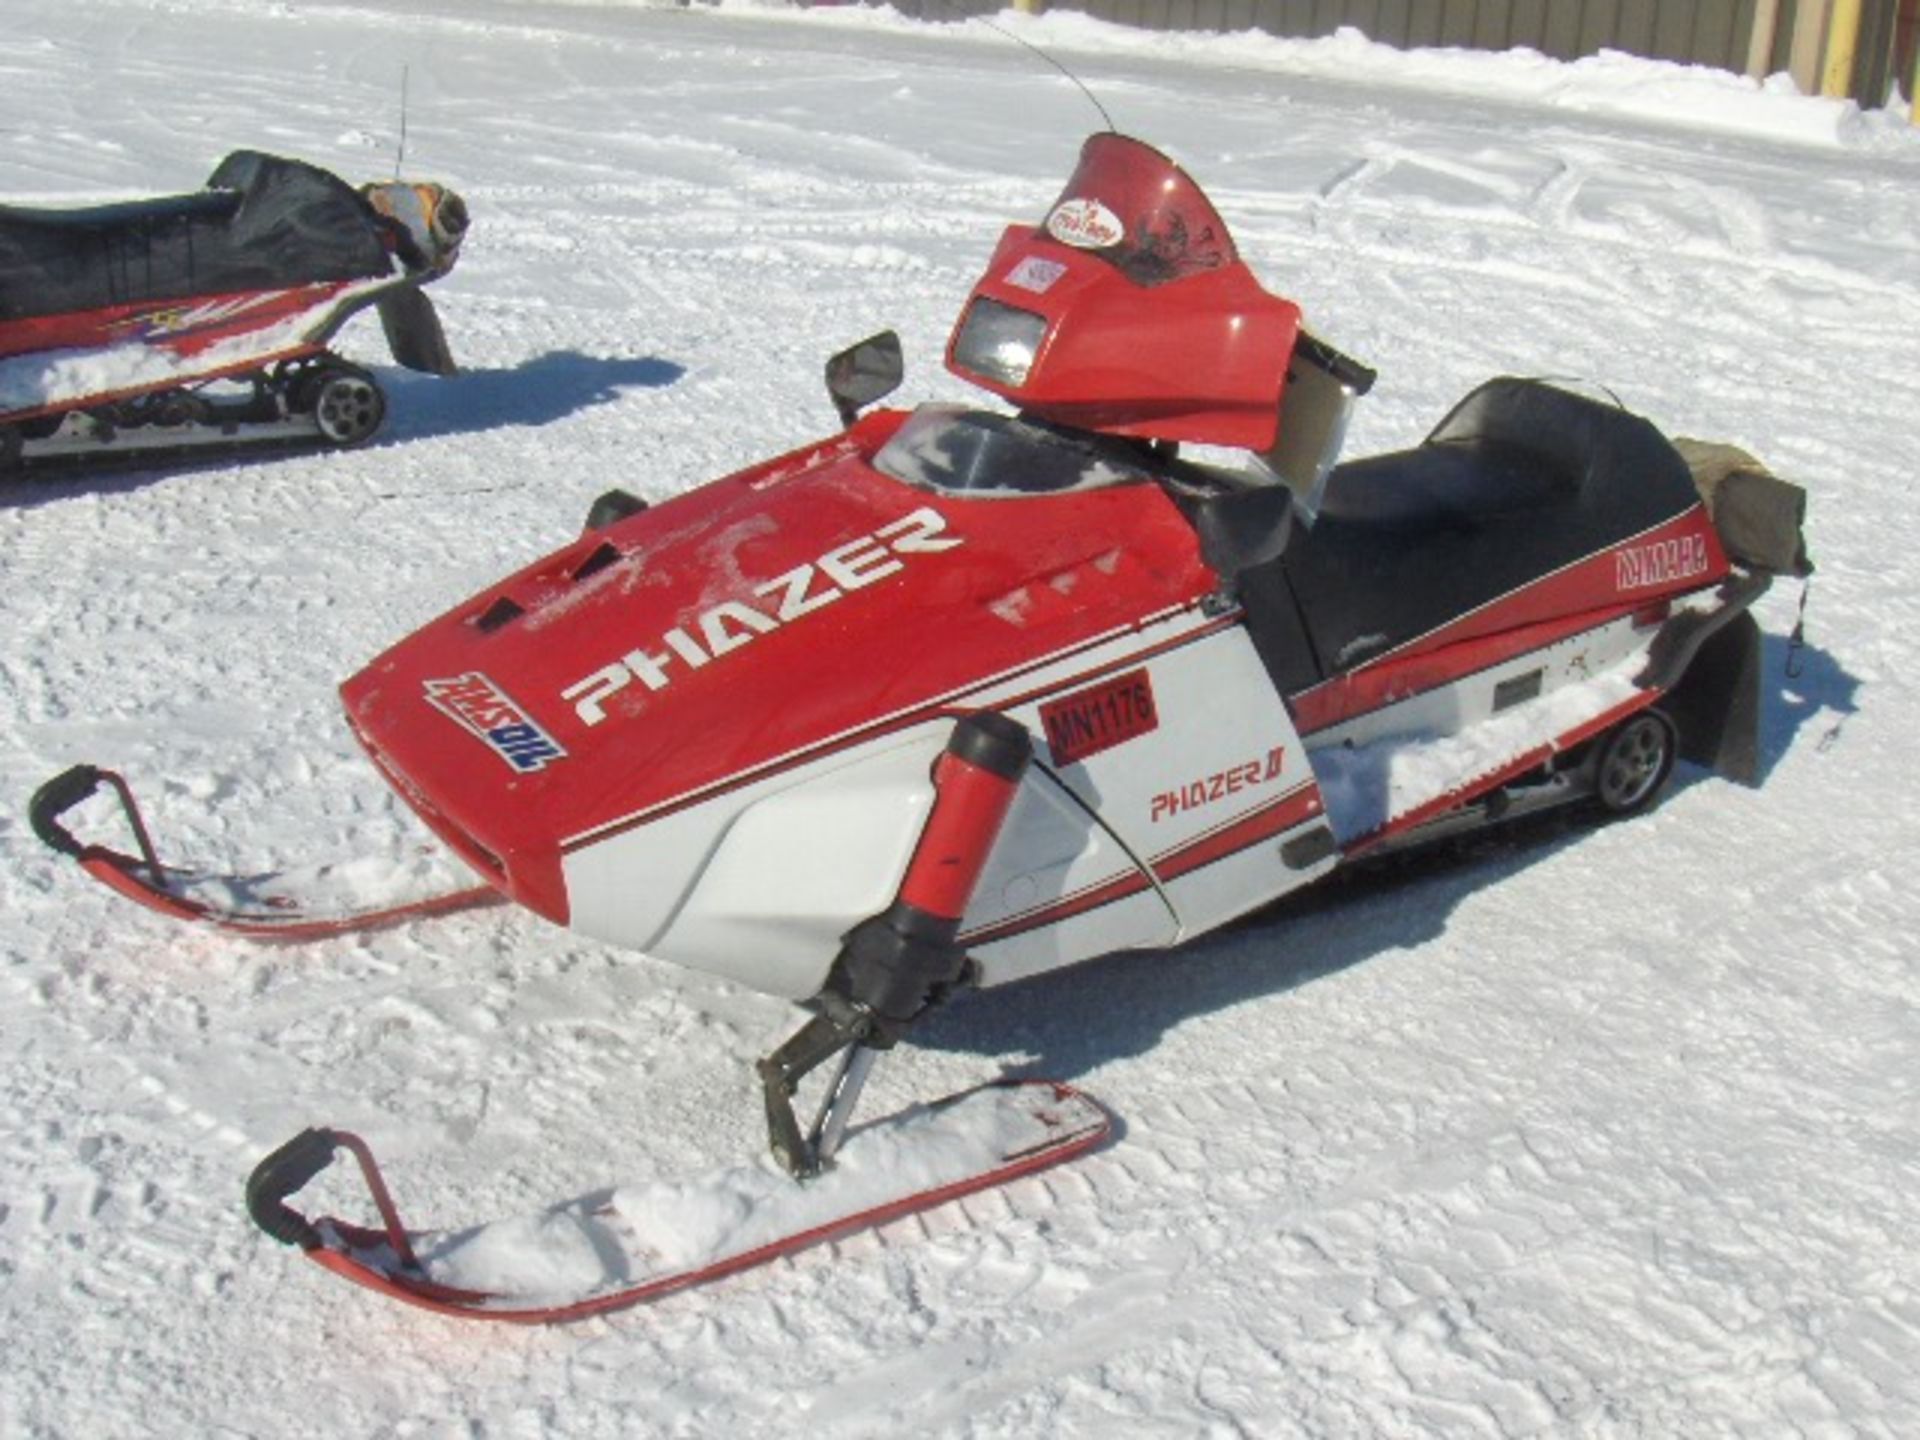 1990 YAMAHA 480 PHAZER II  87F002651 snowmobile, owner started at time of auction check in, 2